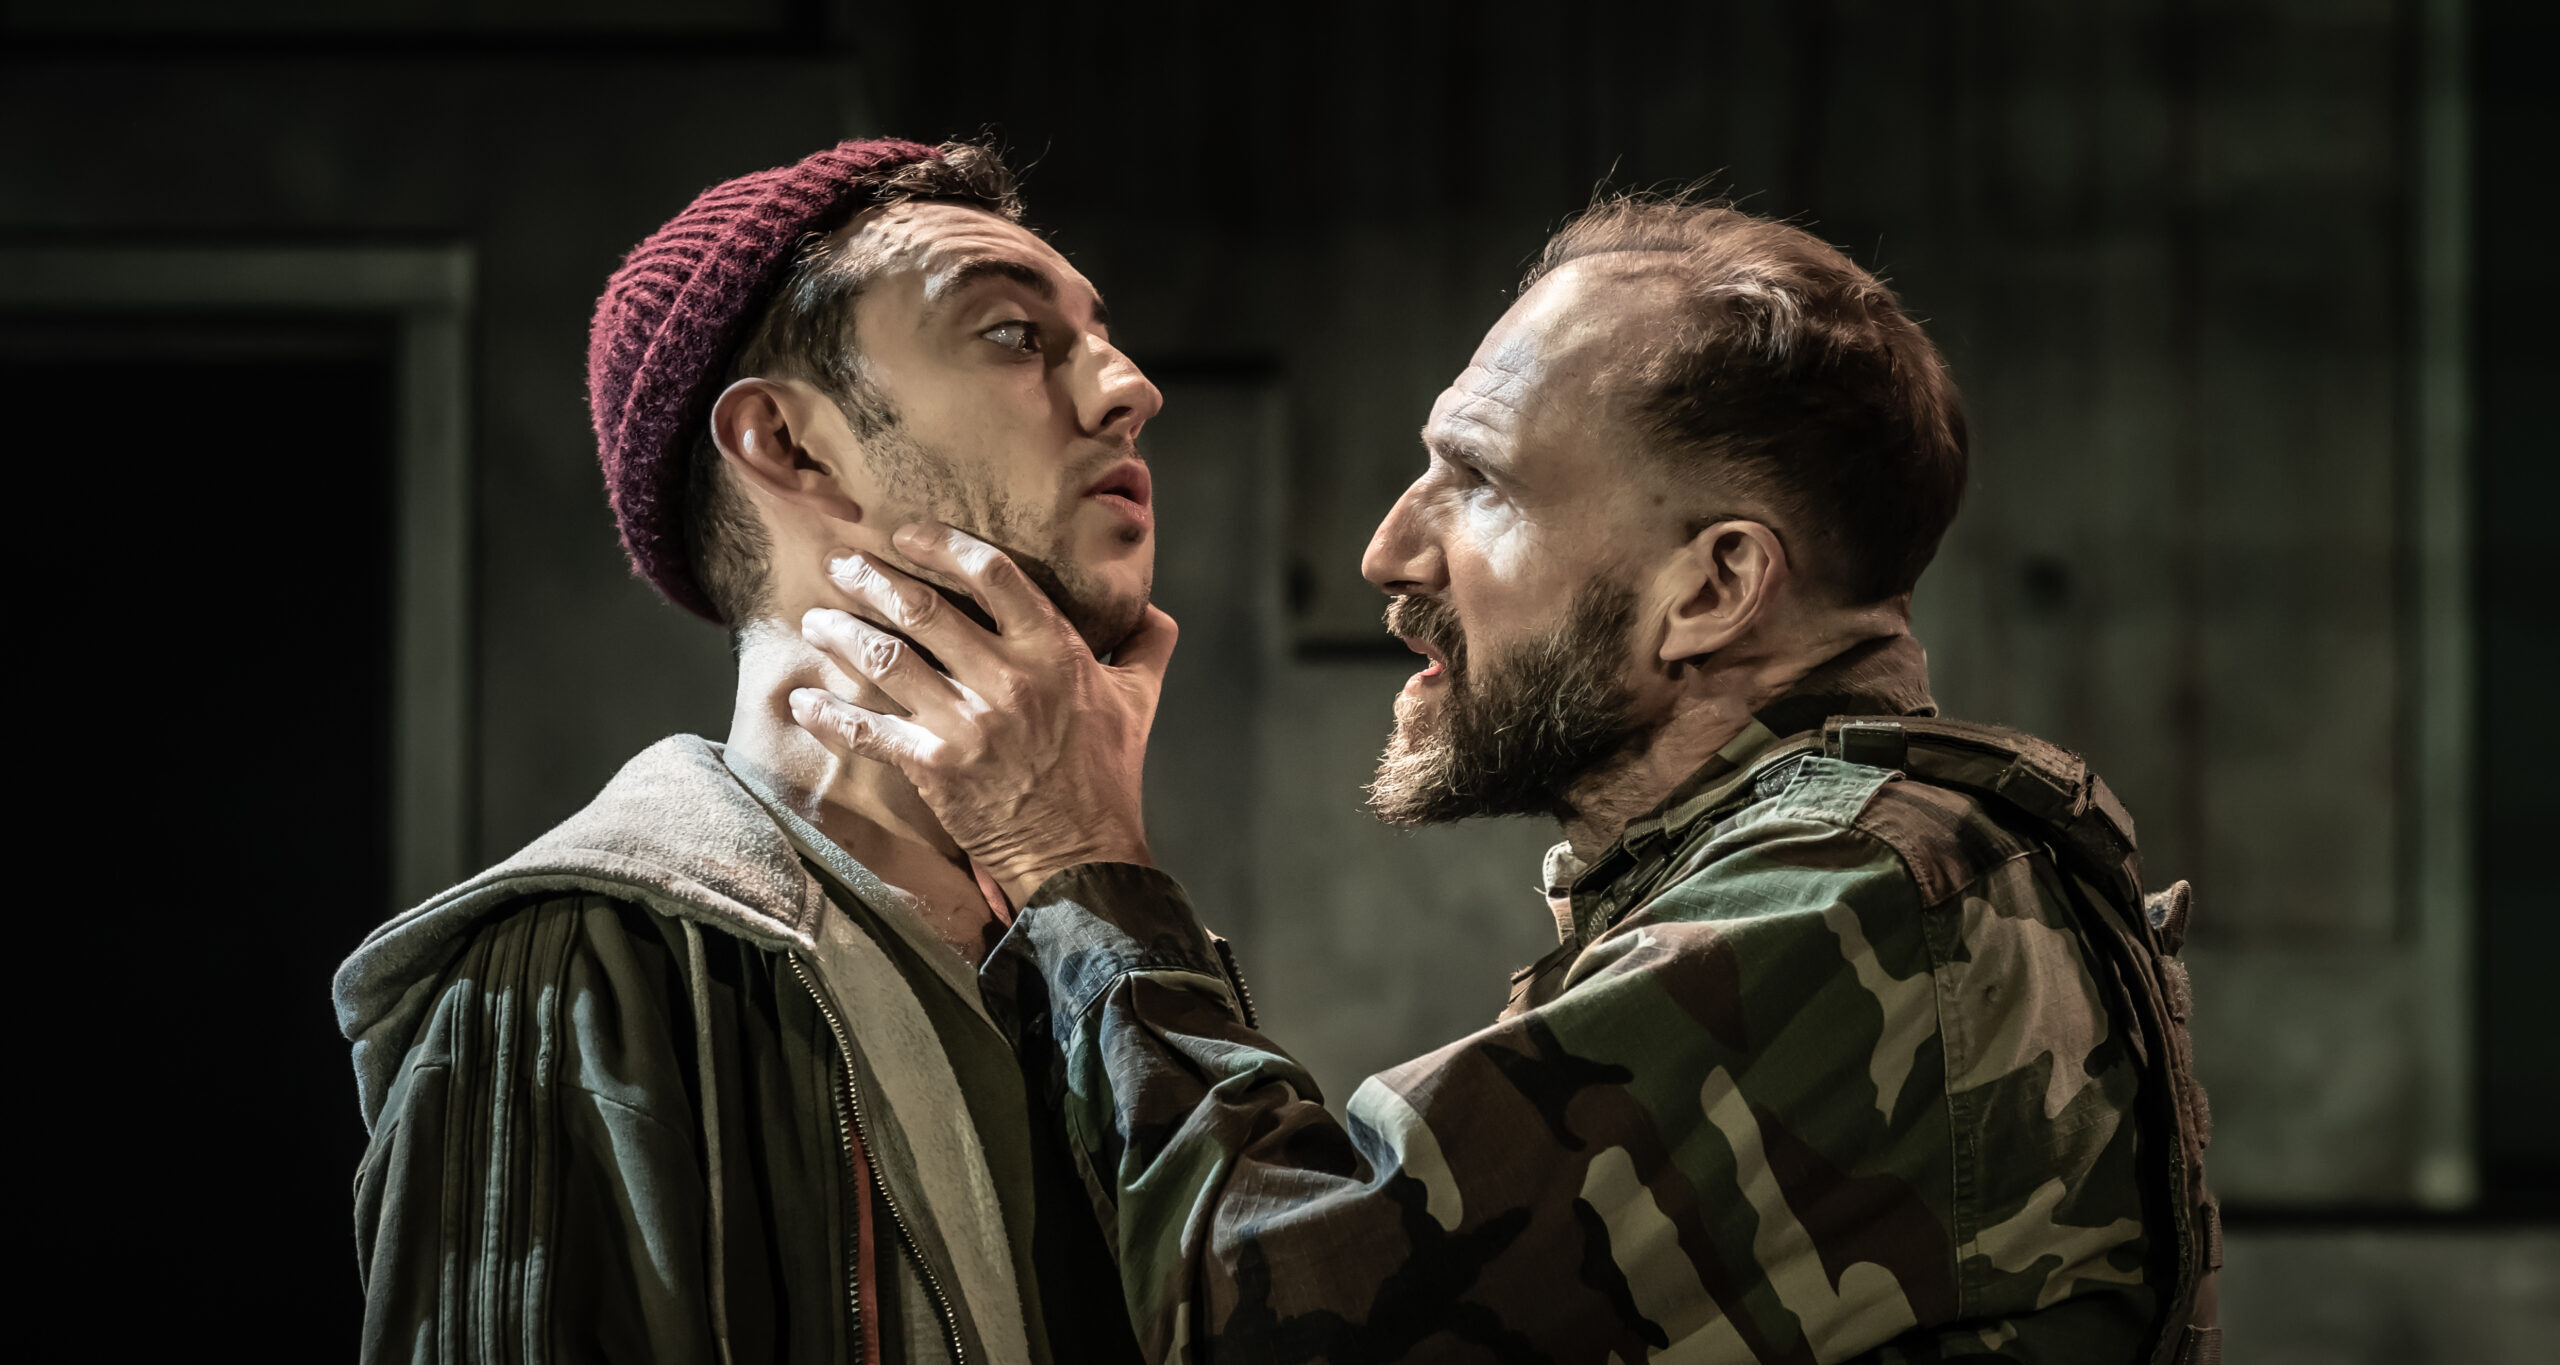 First Murderer played by Jake Neads being choked by Macbeth played by Ralph Fiennes (Marc Brenner)